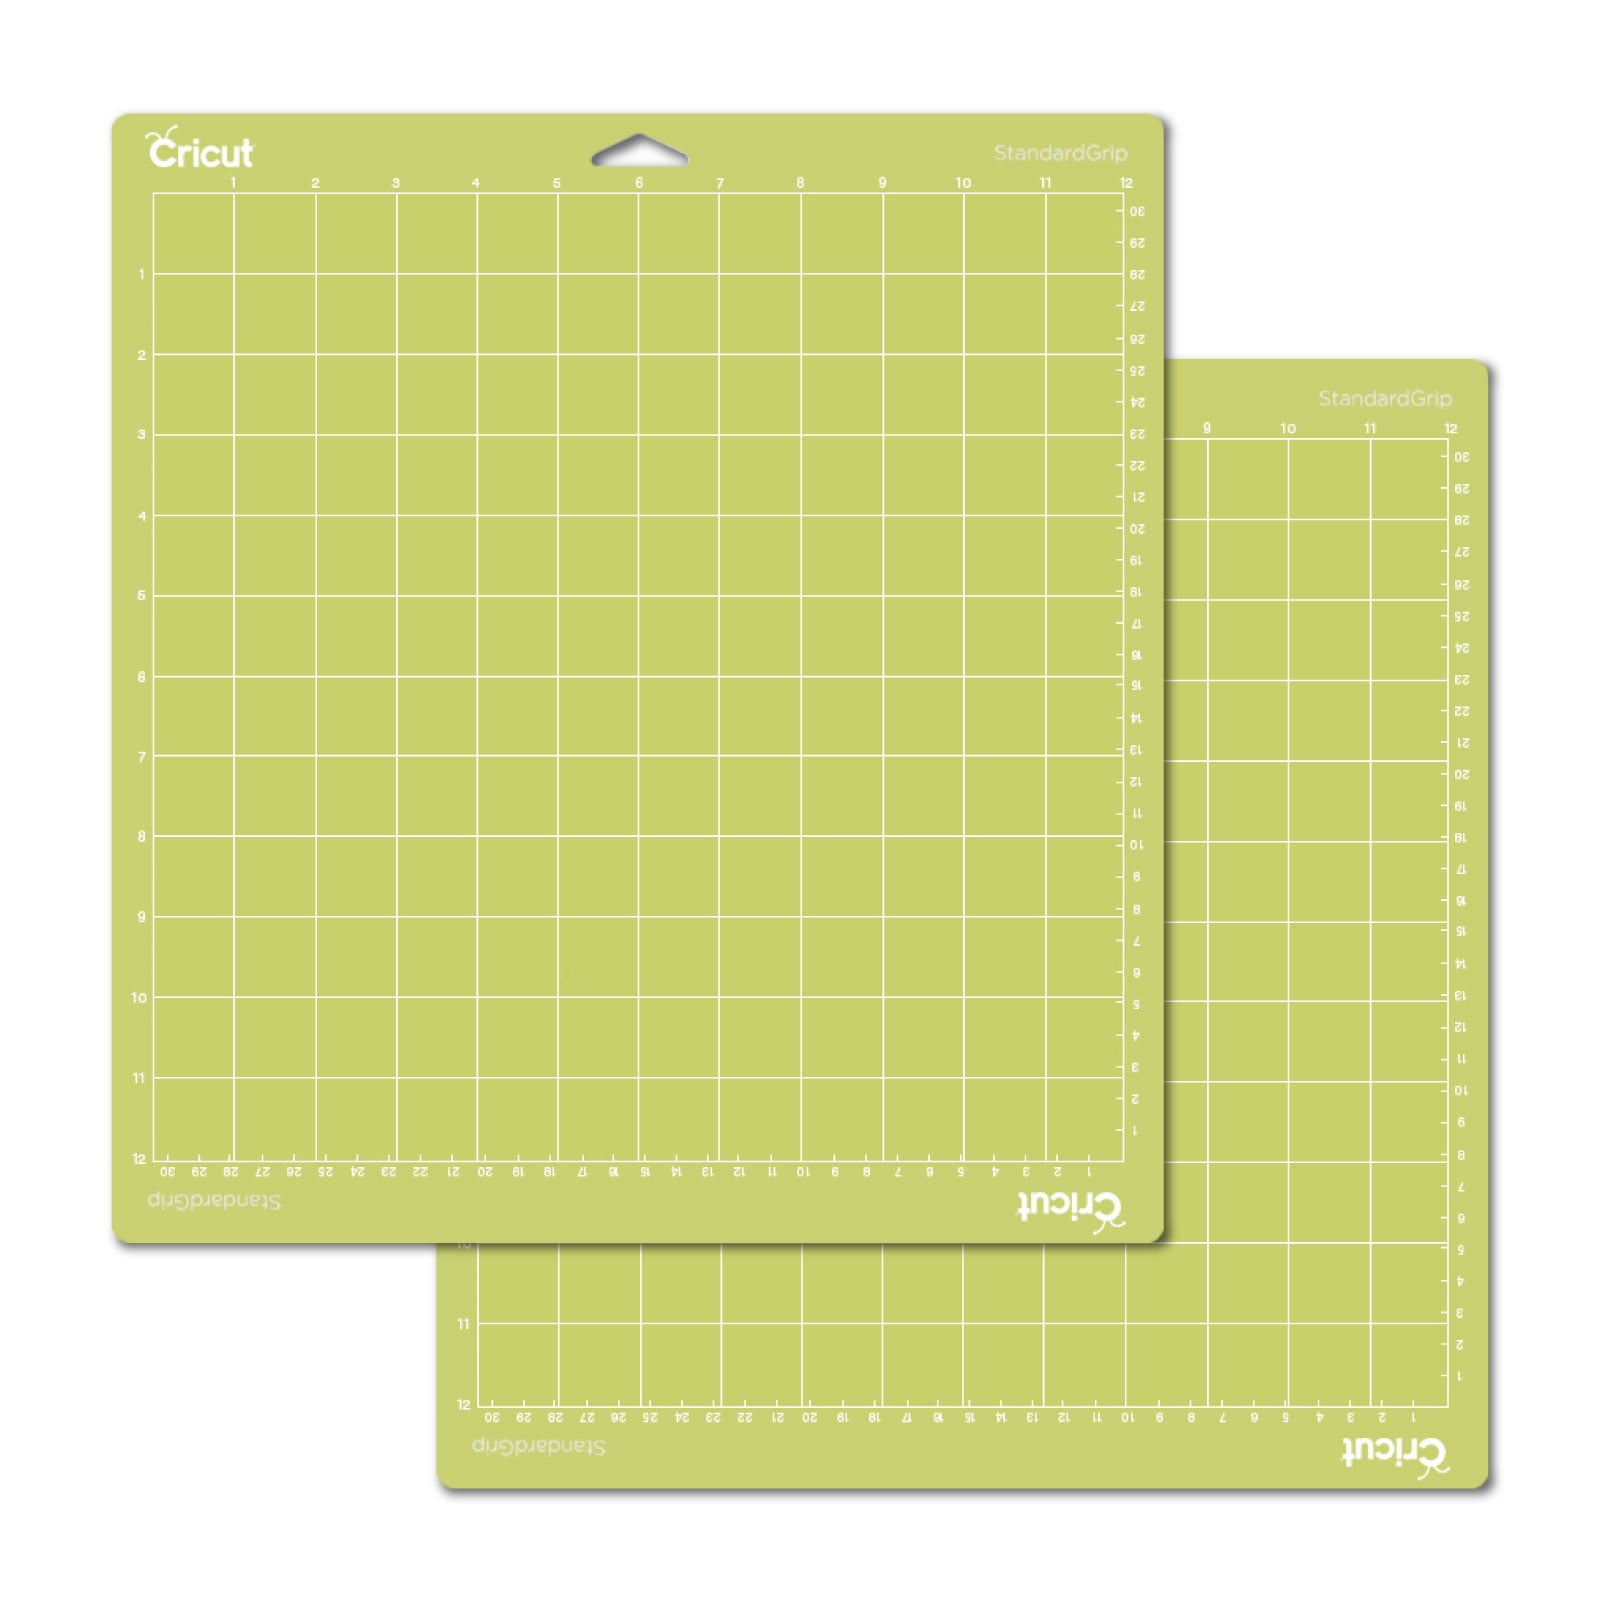 Cricut Maker FabricGrip Mat 12X24 – Quilting Books Patterns and Notions